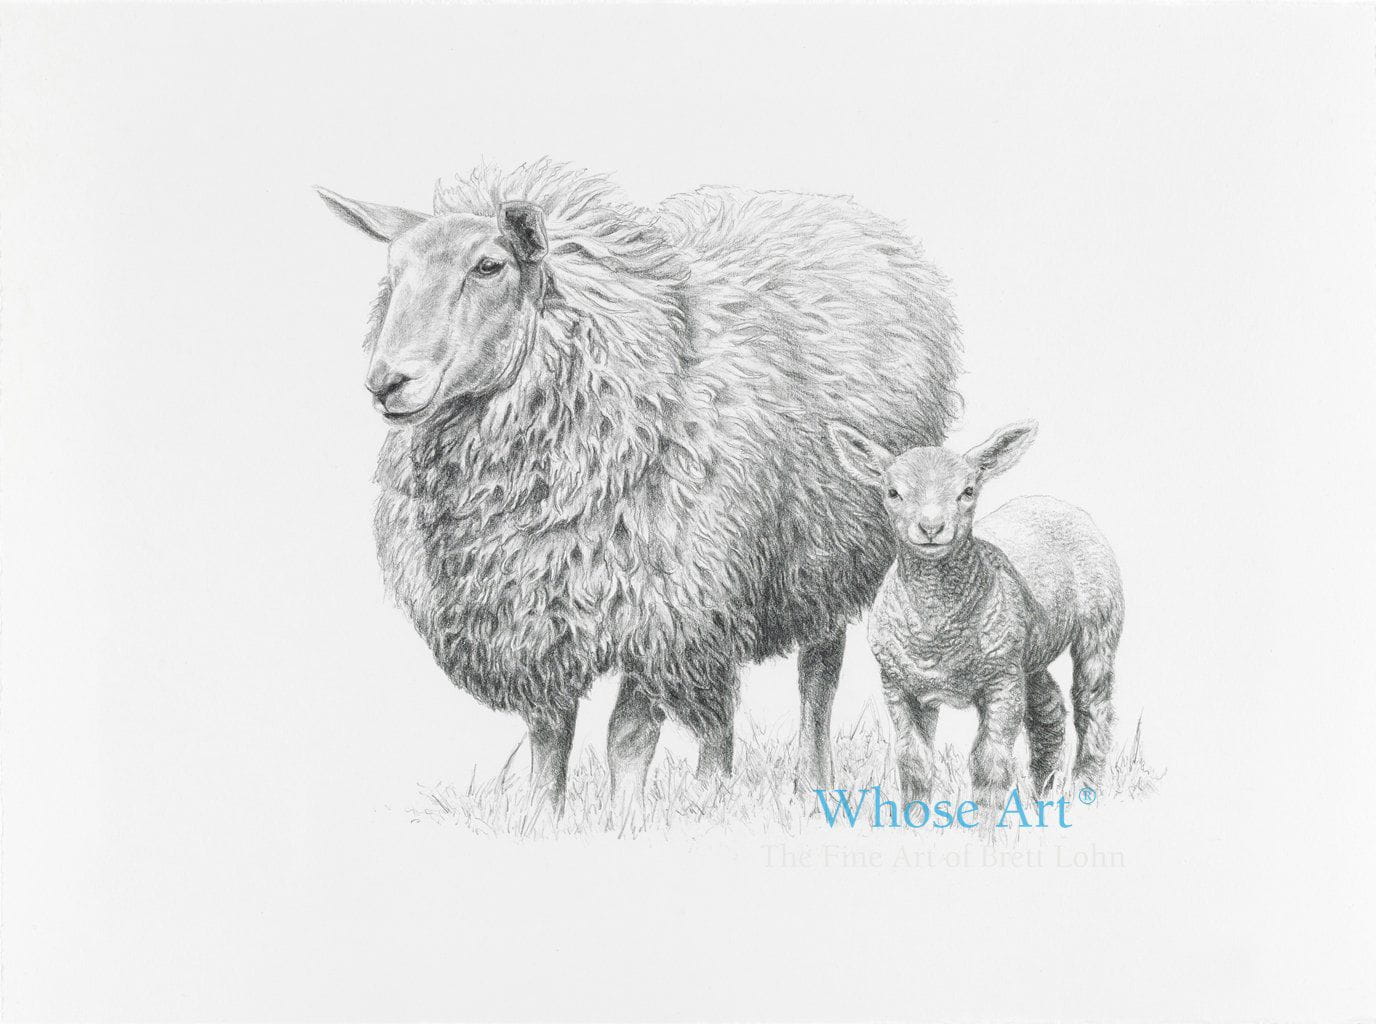 Sheep drawing greeting card drawn in pencil on paper. The drawing shows a sheep and lamb together. The lamb is standing